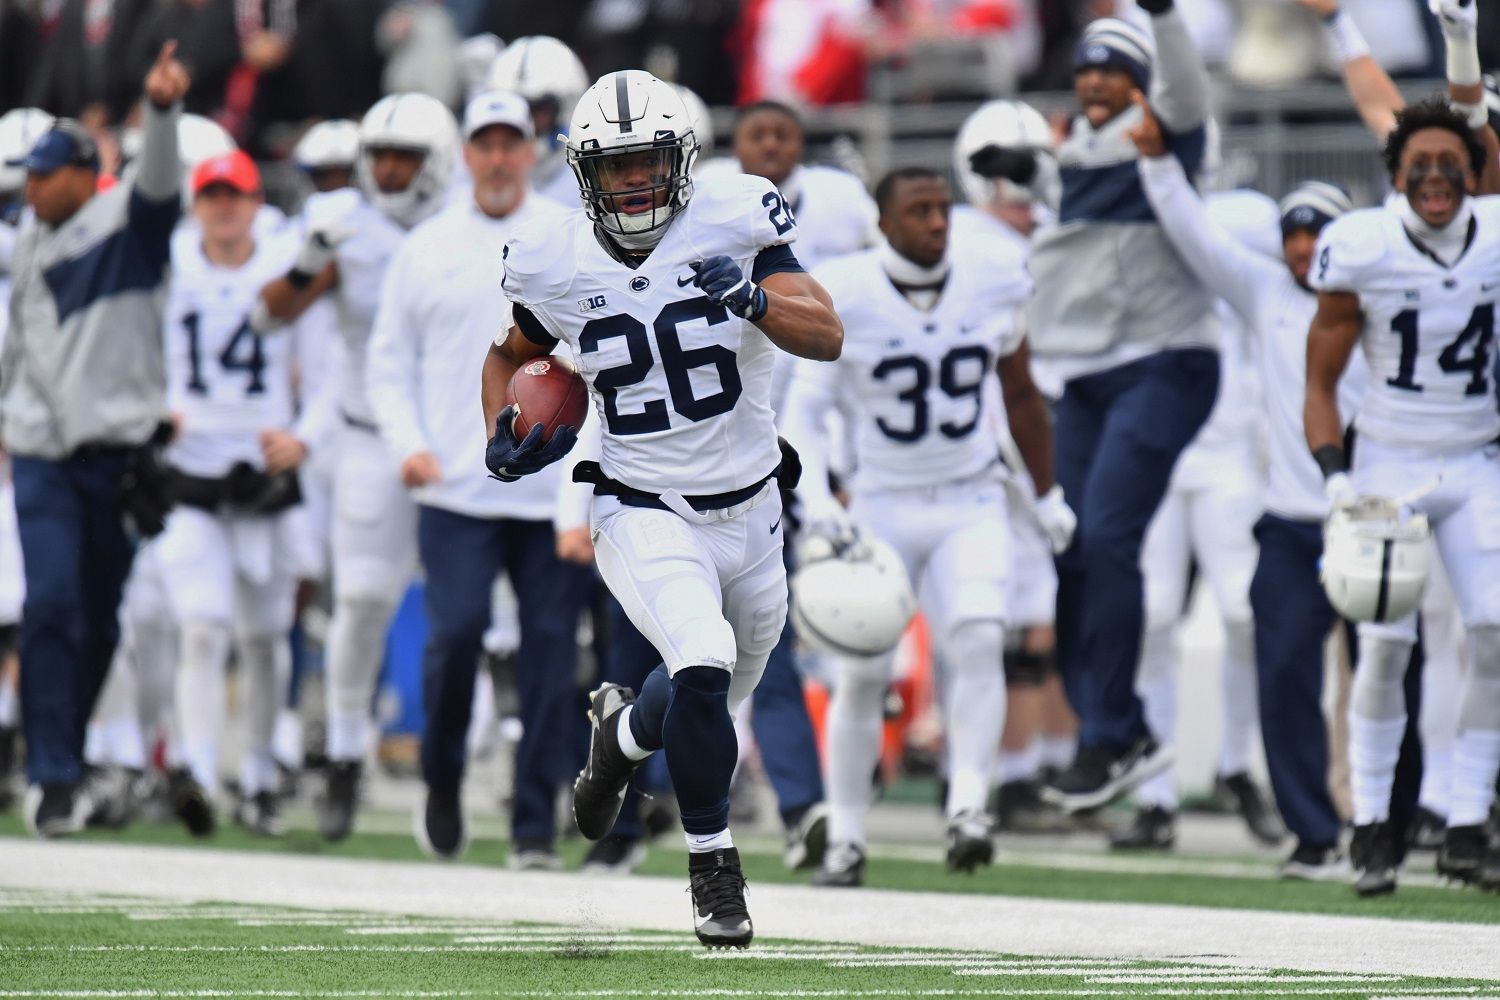 COLUMBUS, OH - OCTOBER 28:  Saquon Barkley #26 of the Penn State Nittany Lions returns the opening kick off 97-yards for a touchdown in the first quarter against the Ohio State Buckeyes at Ohio Stadium on October 28, 2017 in Columbus, Ohio.  (Photo by Jamie Sabau/Getty Images)